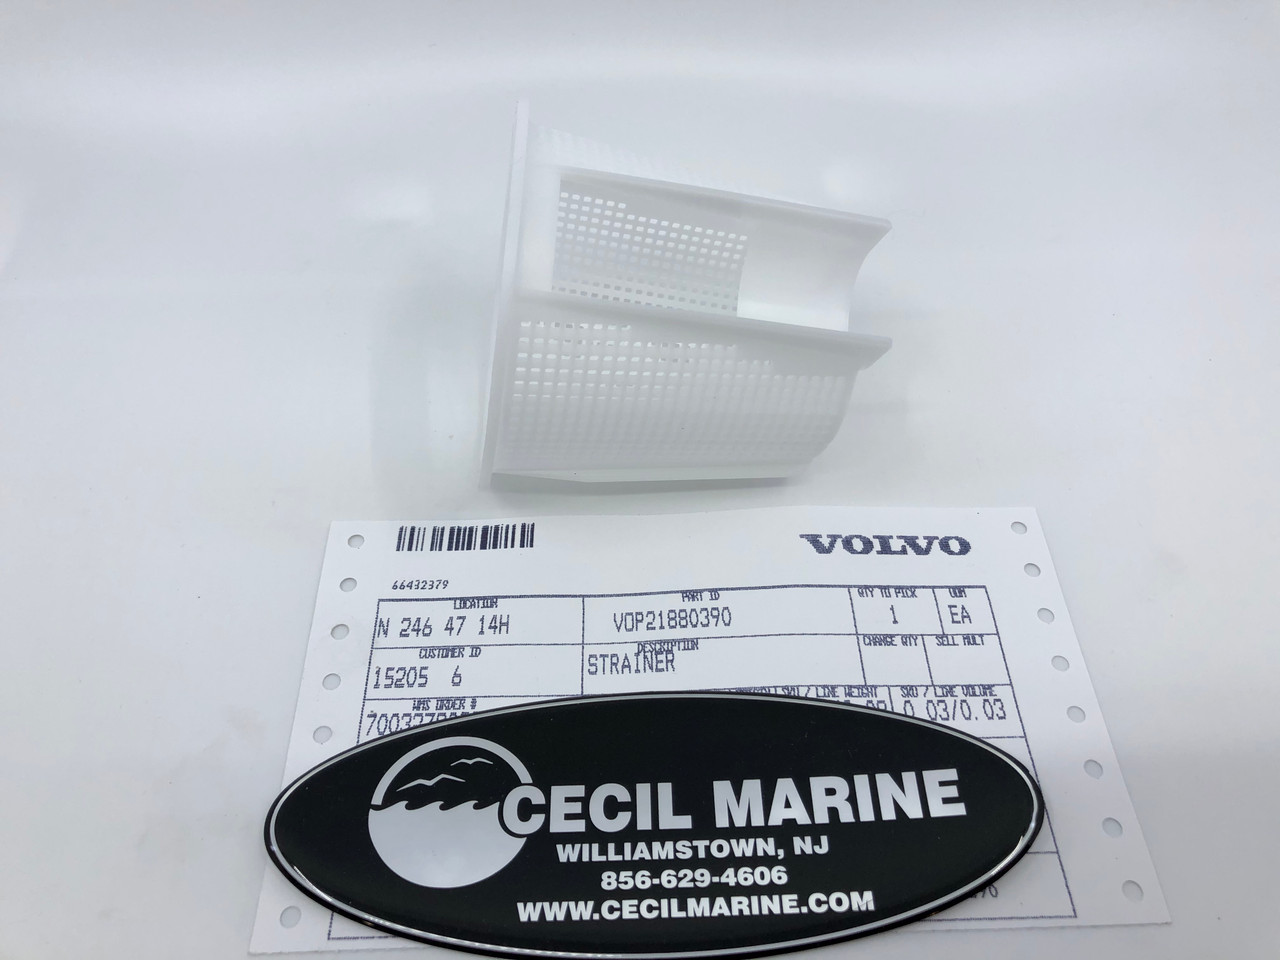 $49.99* GENUINE VOLVO no tax*  STRAINER 21880390 *In Stock & Ready To Ship!